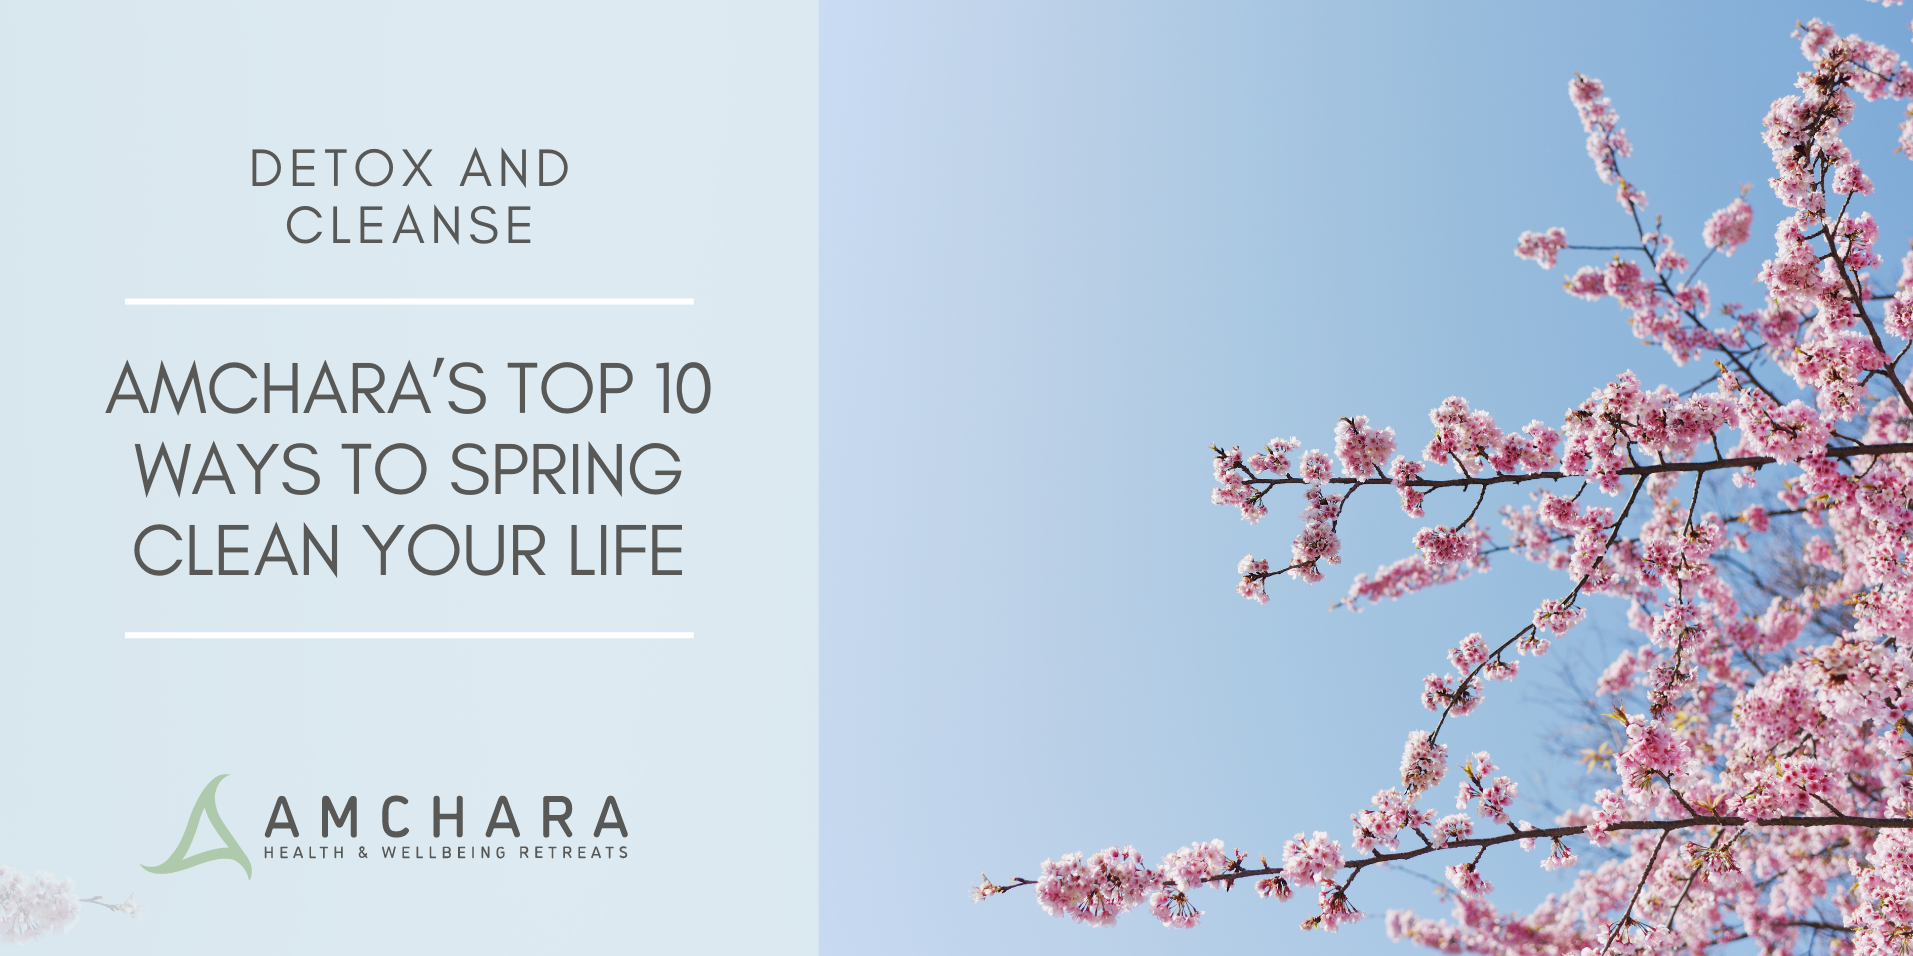 Amchara’s Top 10 Ways to Spring Clean your Life